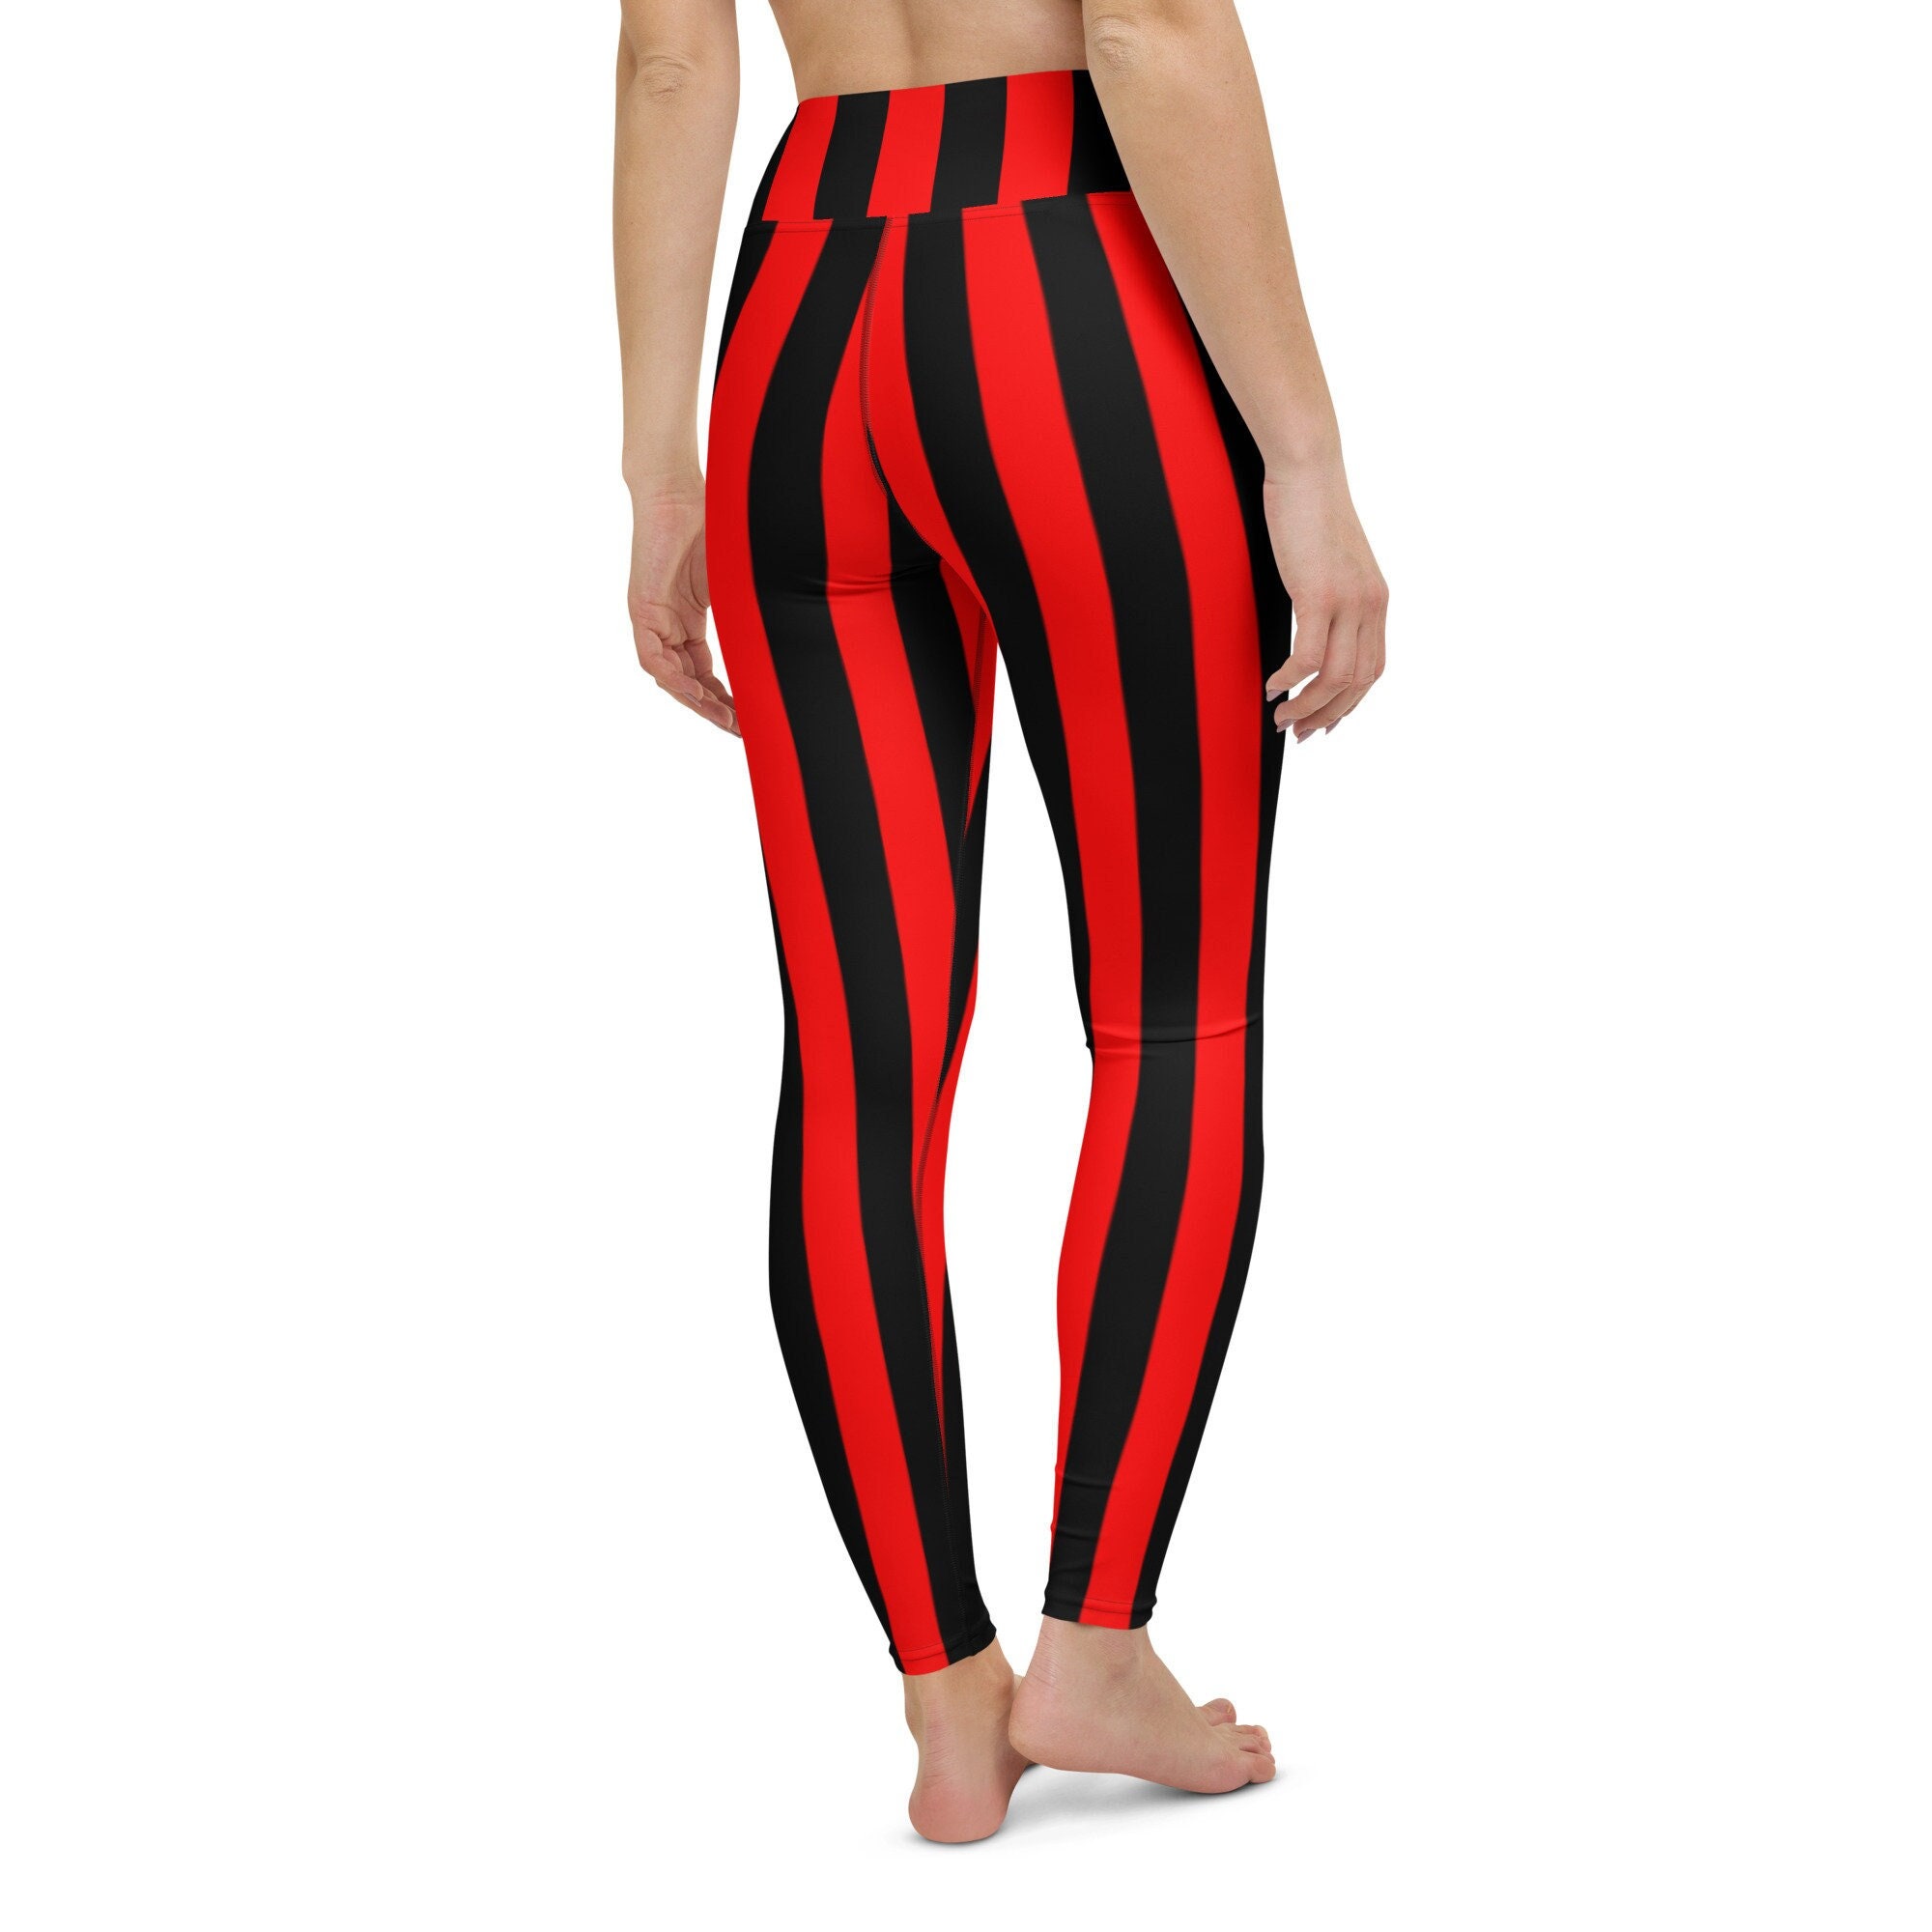 Martyr Playwright Flipper black pants with red stripe womens dealer ...